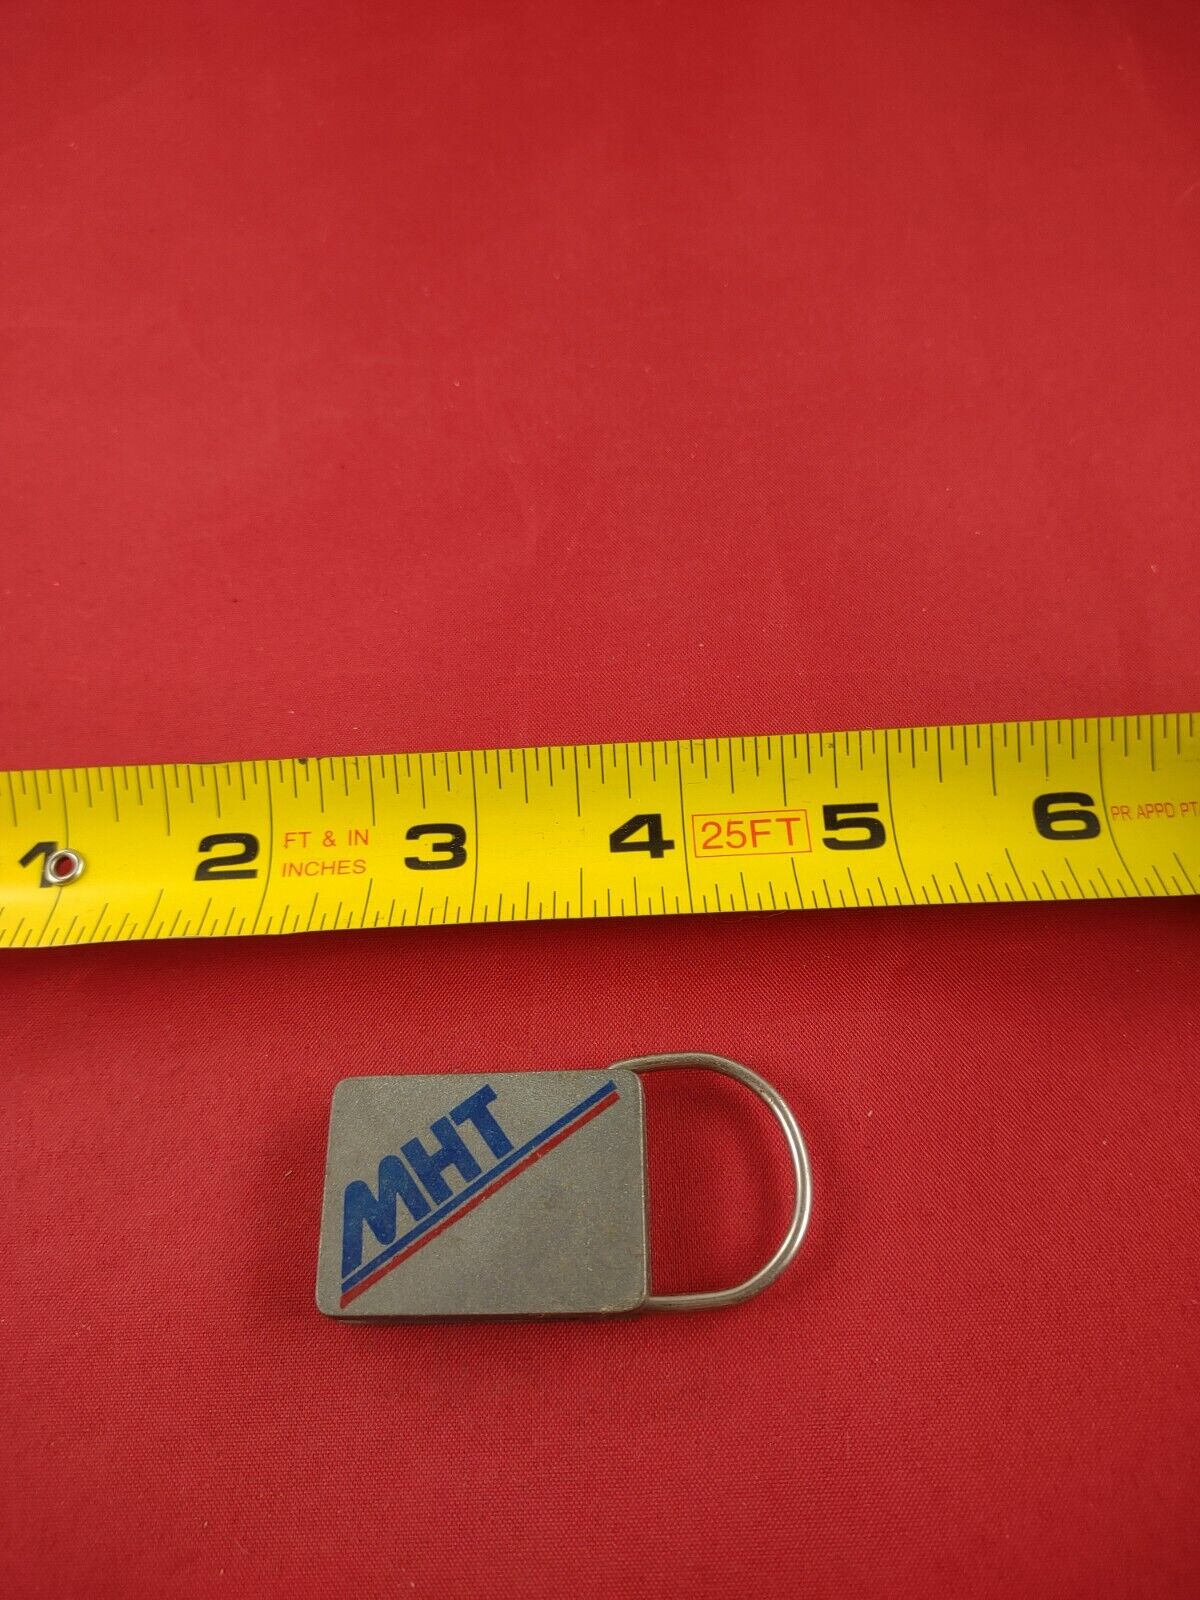 Vintage Manufacturers Hanover MHT Keychain Key Ring Chain Fob Hangtag *135-G